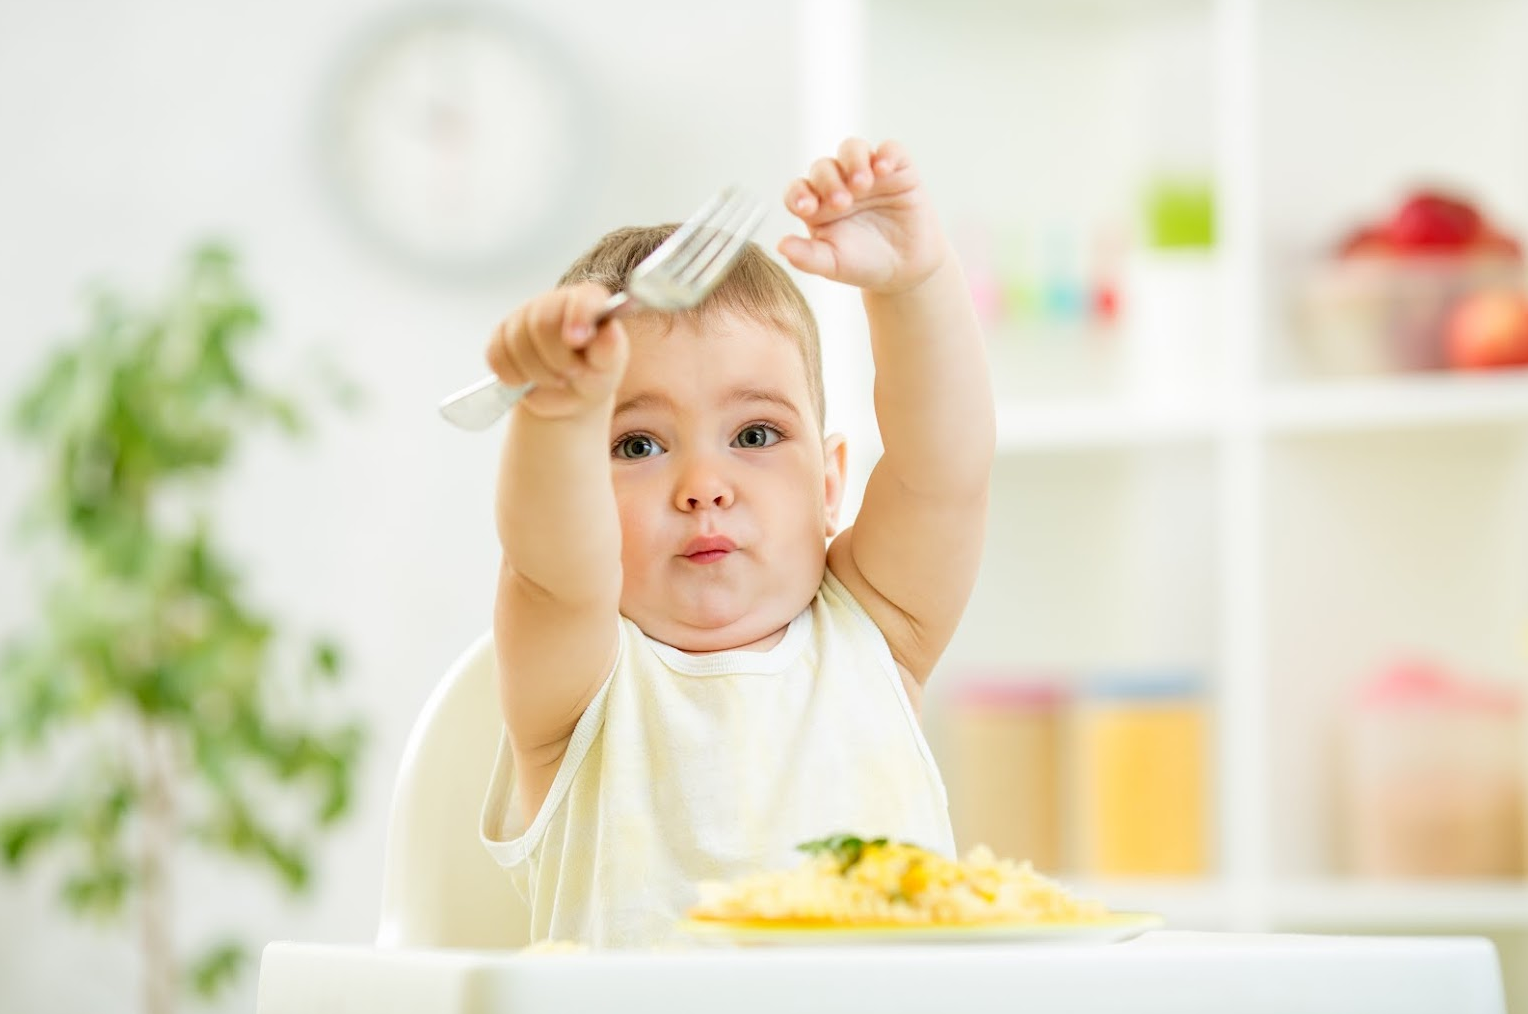 Messy Mealtime Guide: What You Need to Know When Feeding an Infant